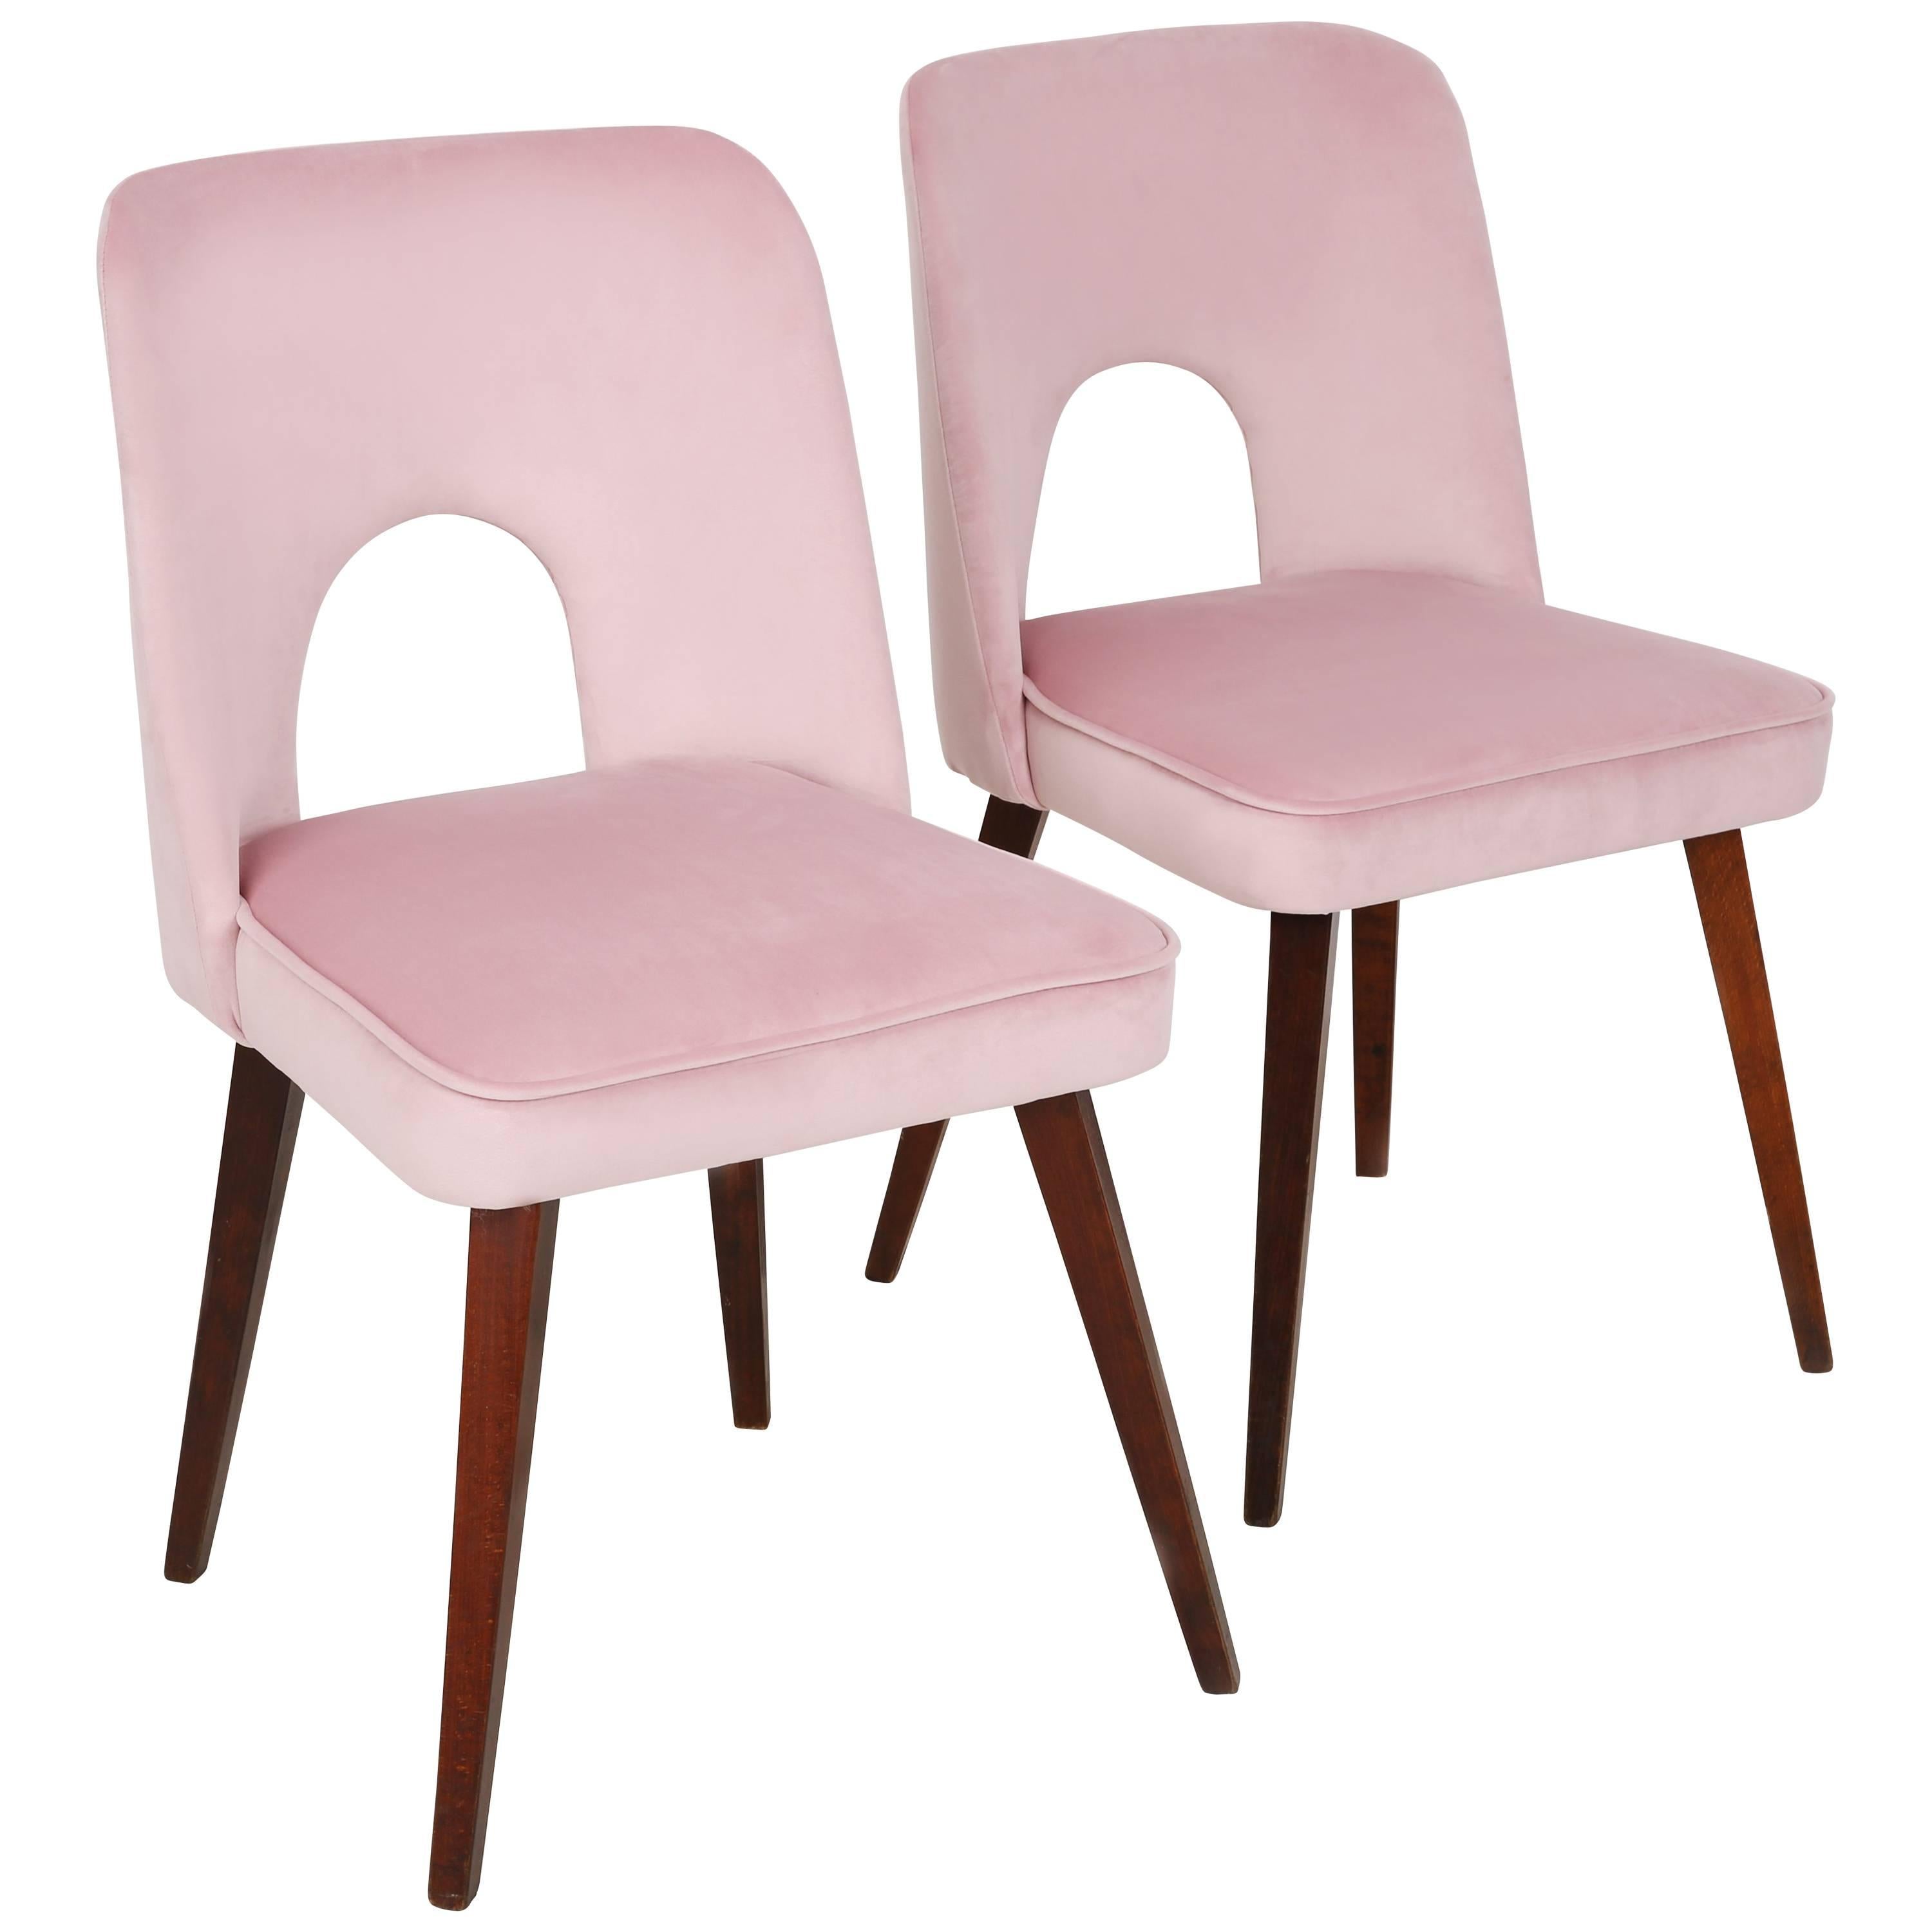 Six beautiful chairs type 1020 colloquially called 